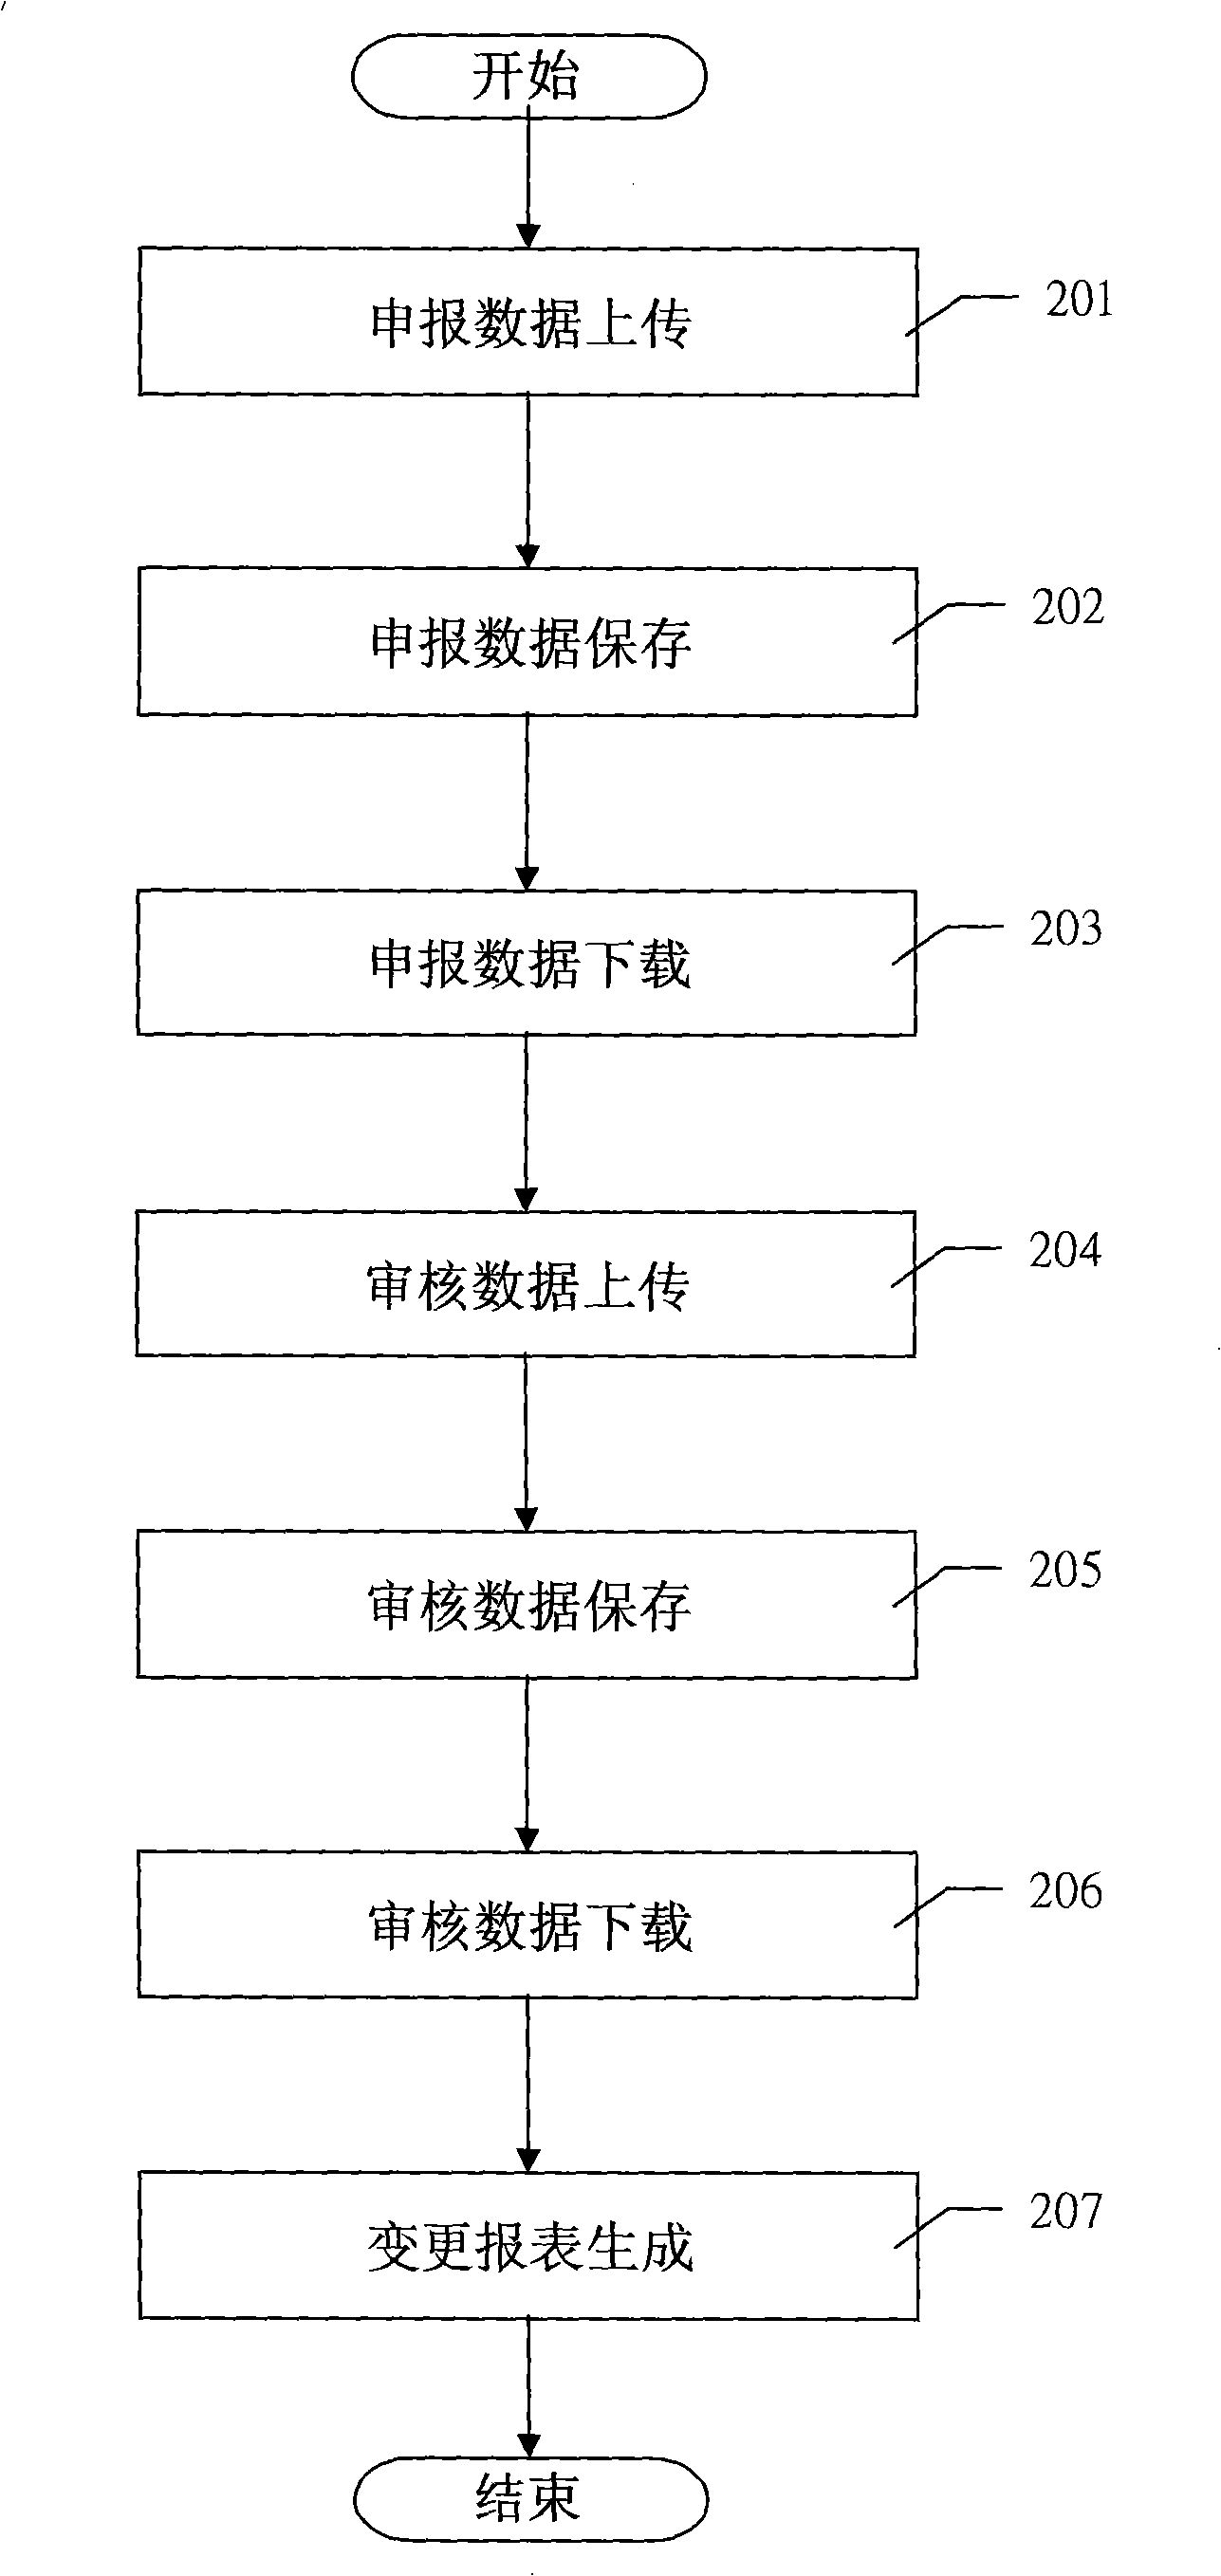 Engineering change charge monitoring system and method